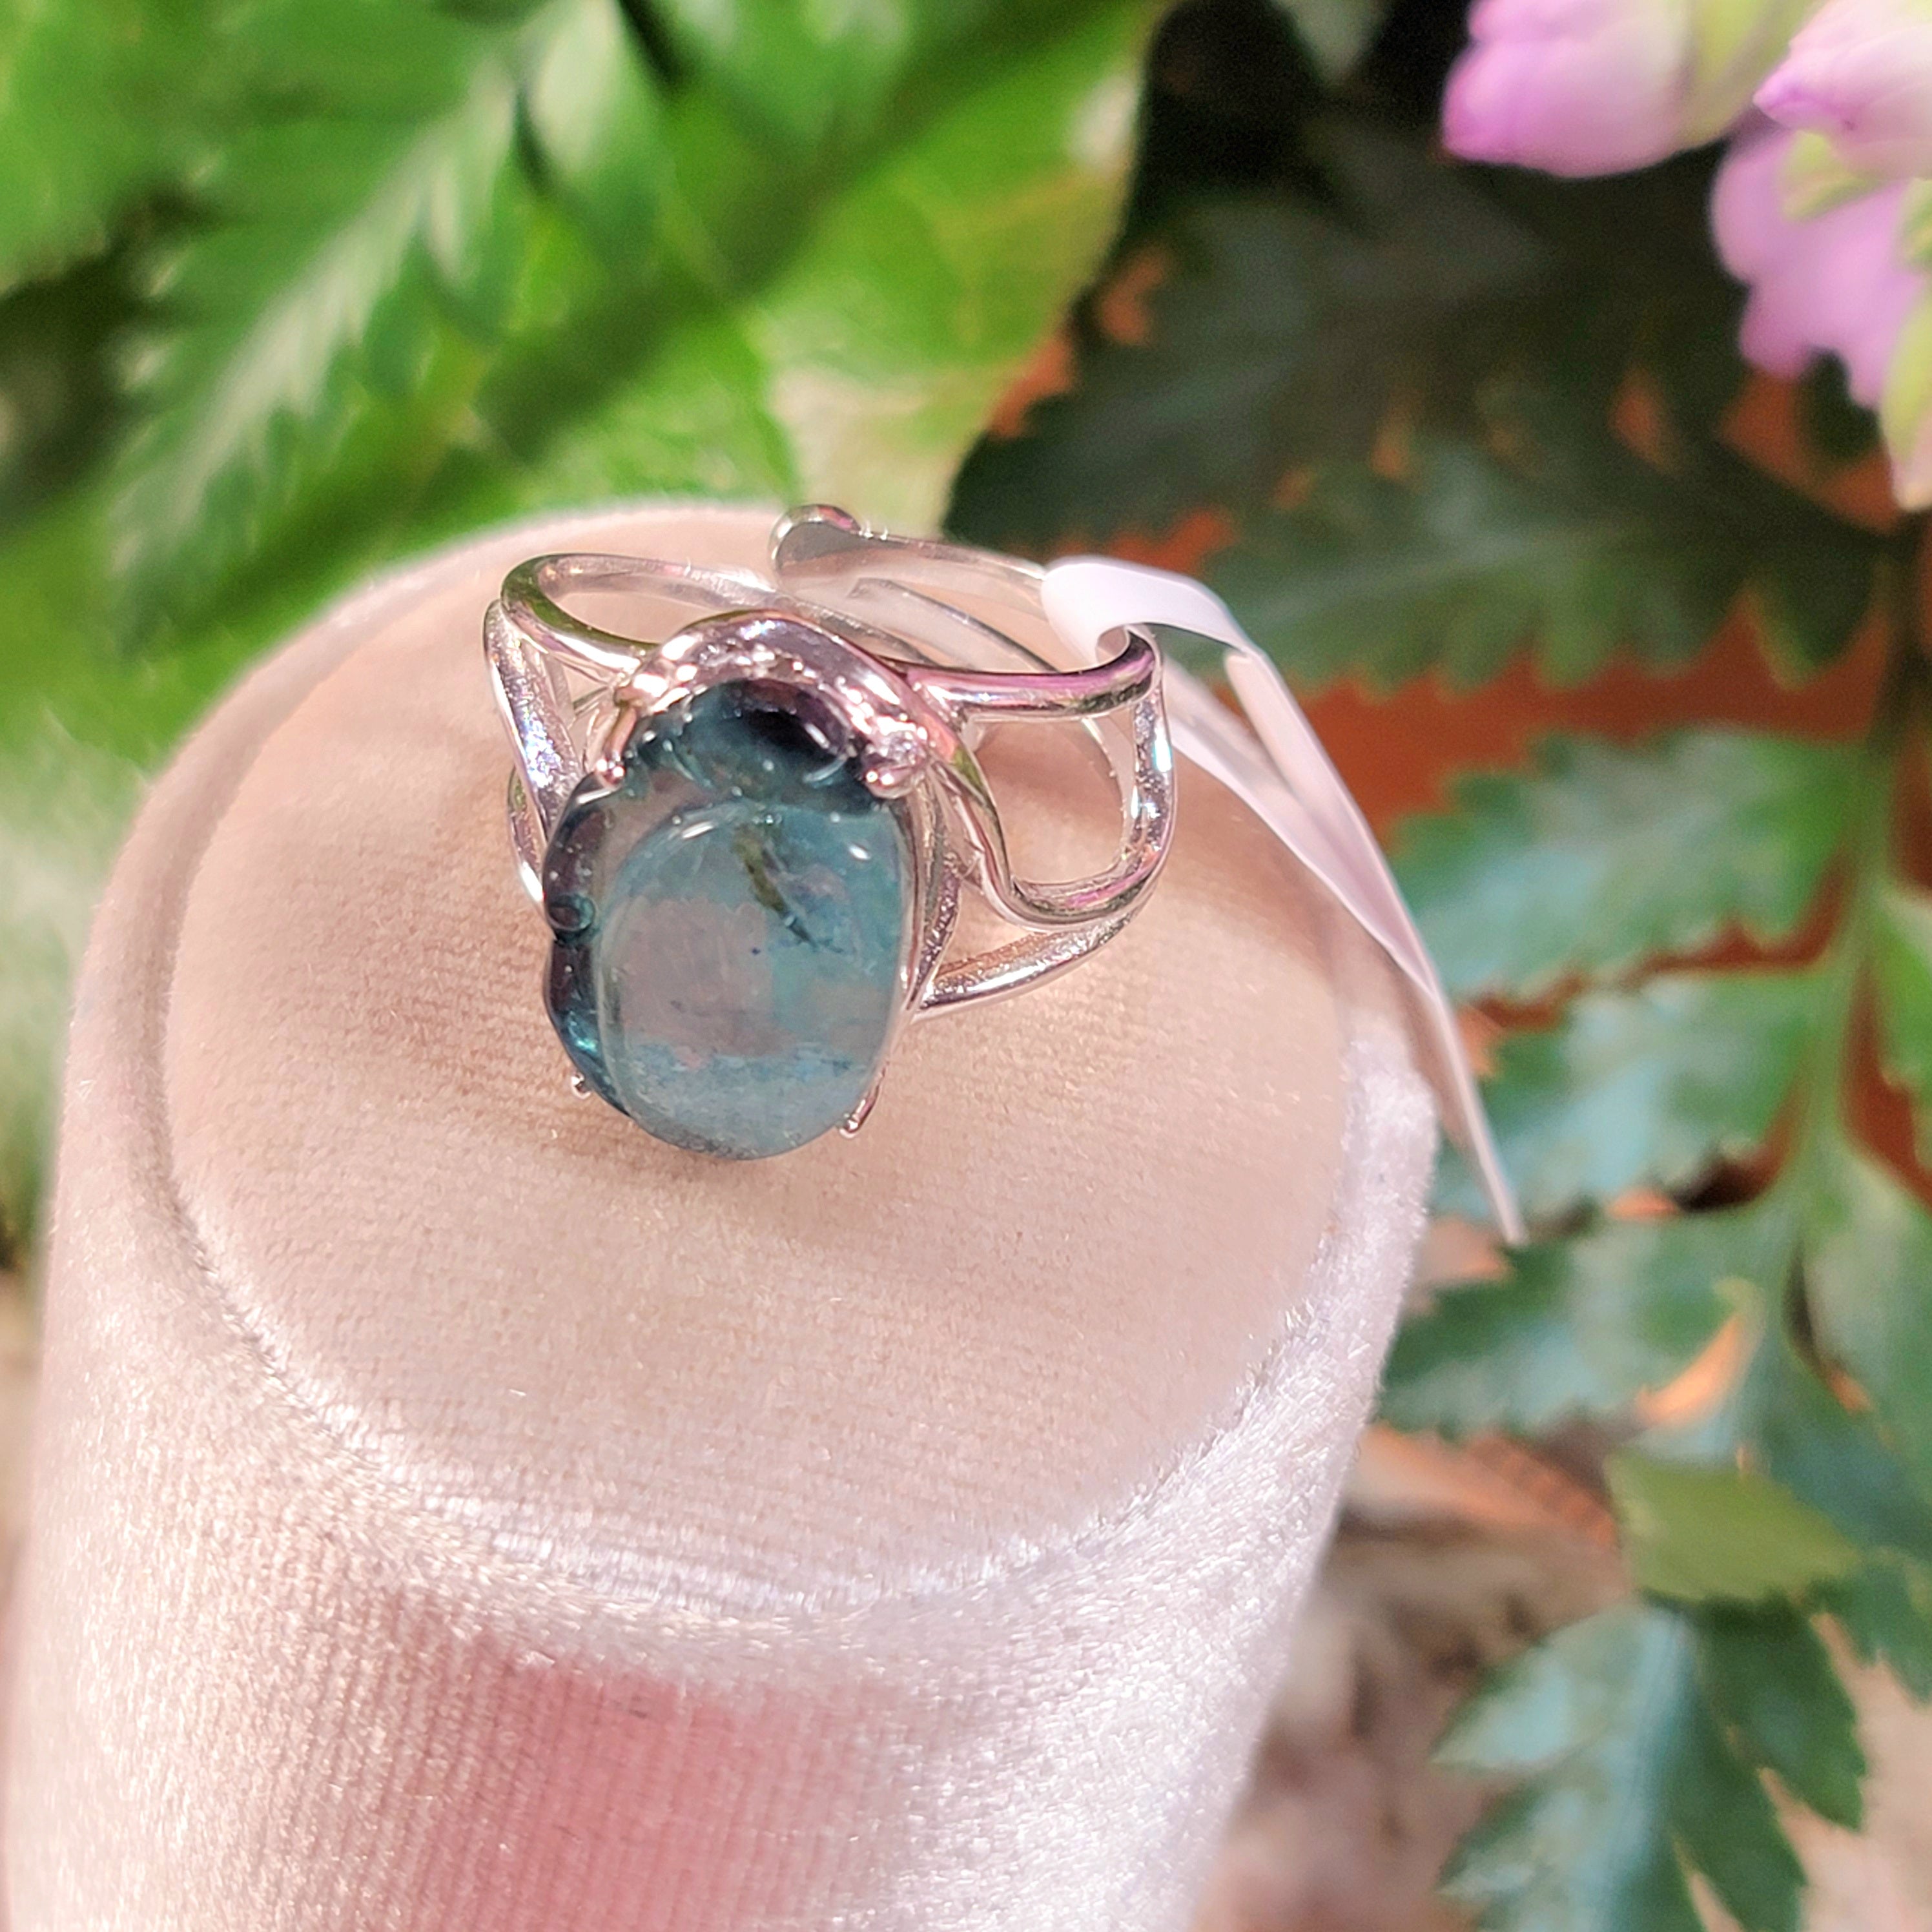 Blue Tourmaline Carved Ruyi Finger Bracelet Adjustable Ring for Communication and Accessing Higher Realms of Consciousness